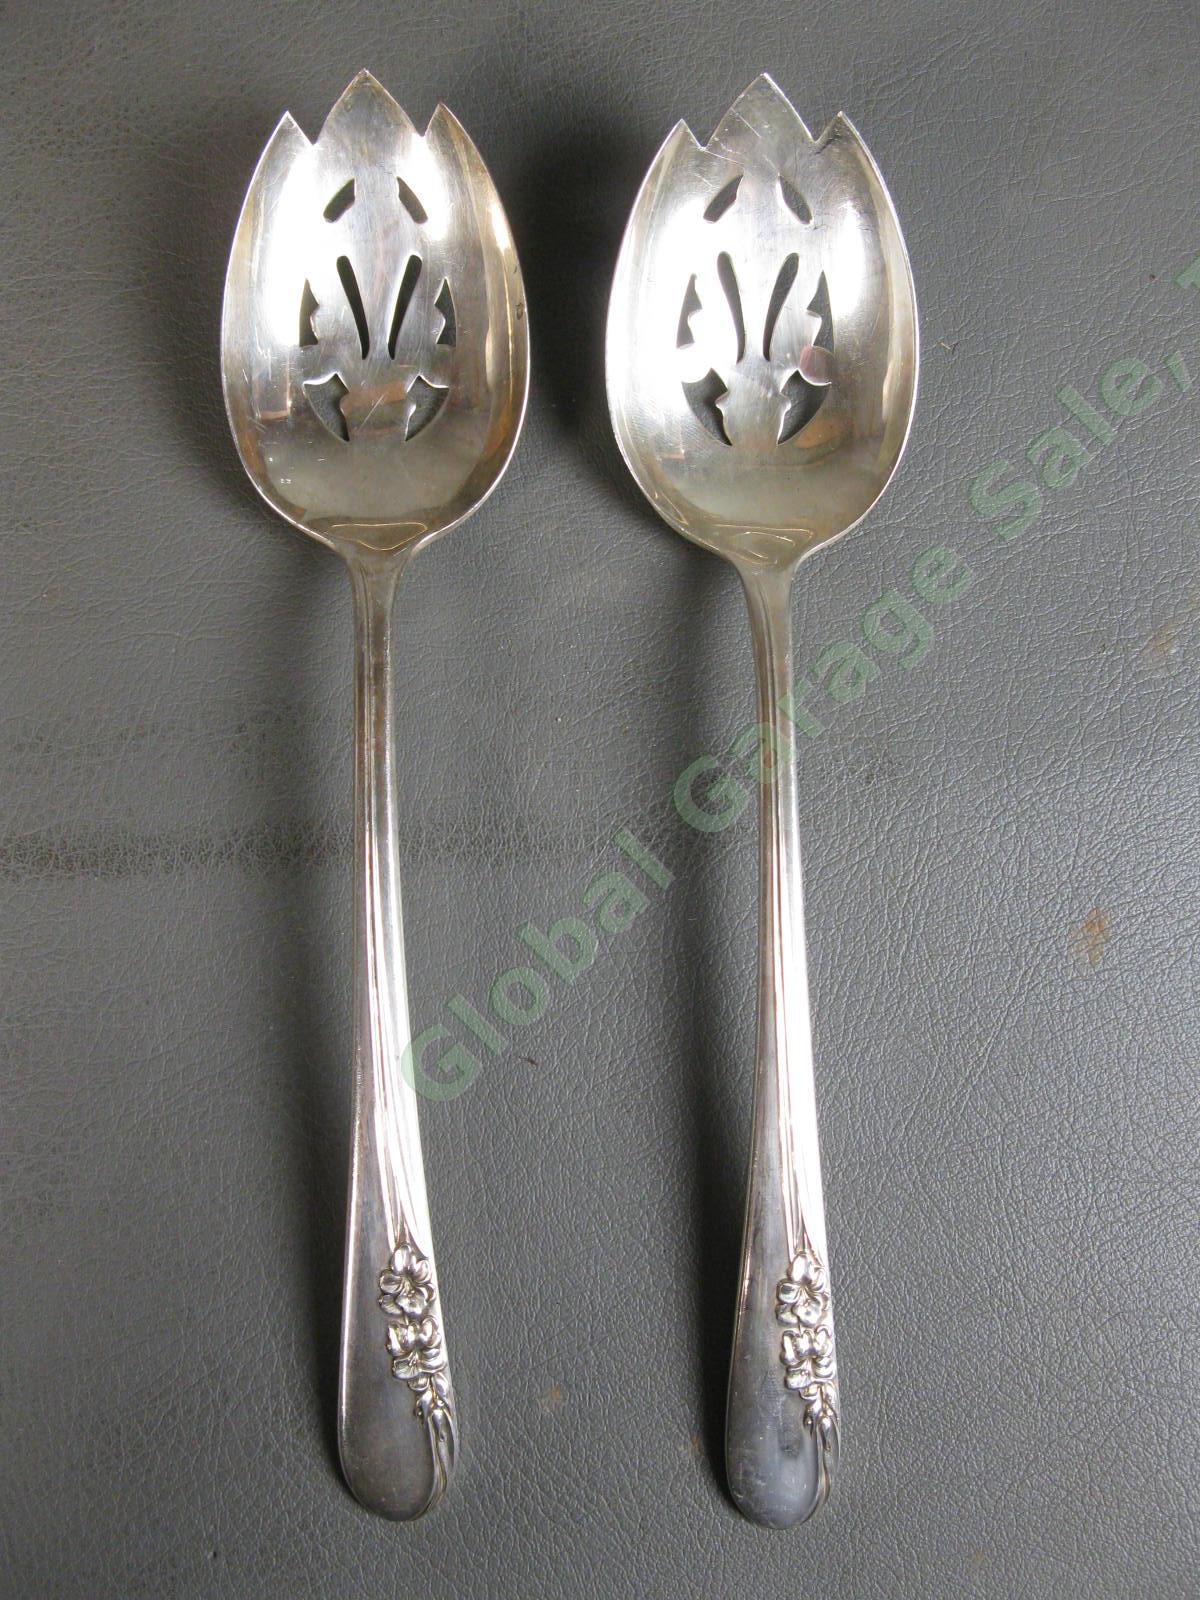 2 International Sterling Silver Blossom Time Pierced Serving Spoon Set Pair 124g